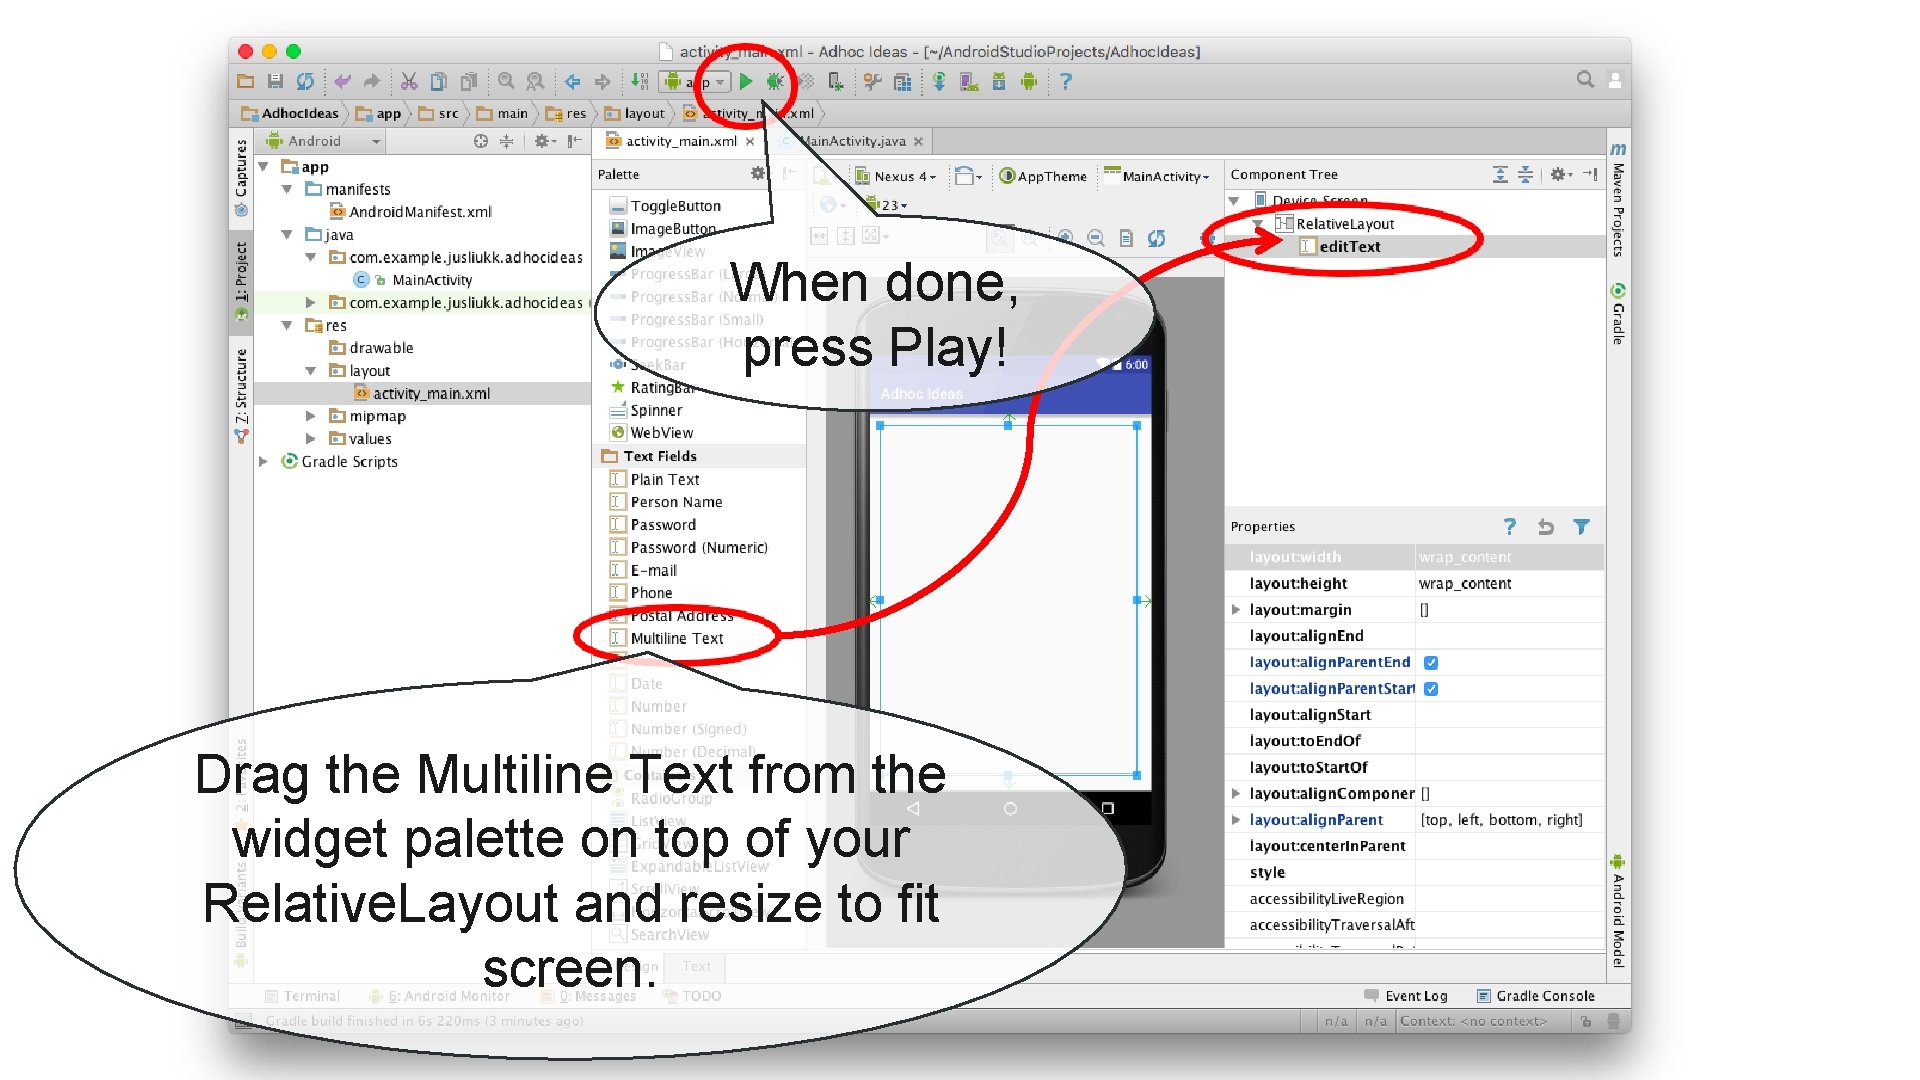 When done, press Play! Drag the Multiline Text from the widget palette on top